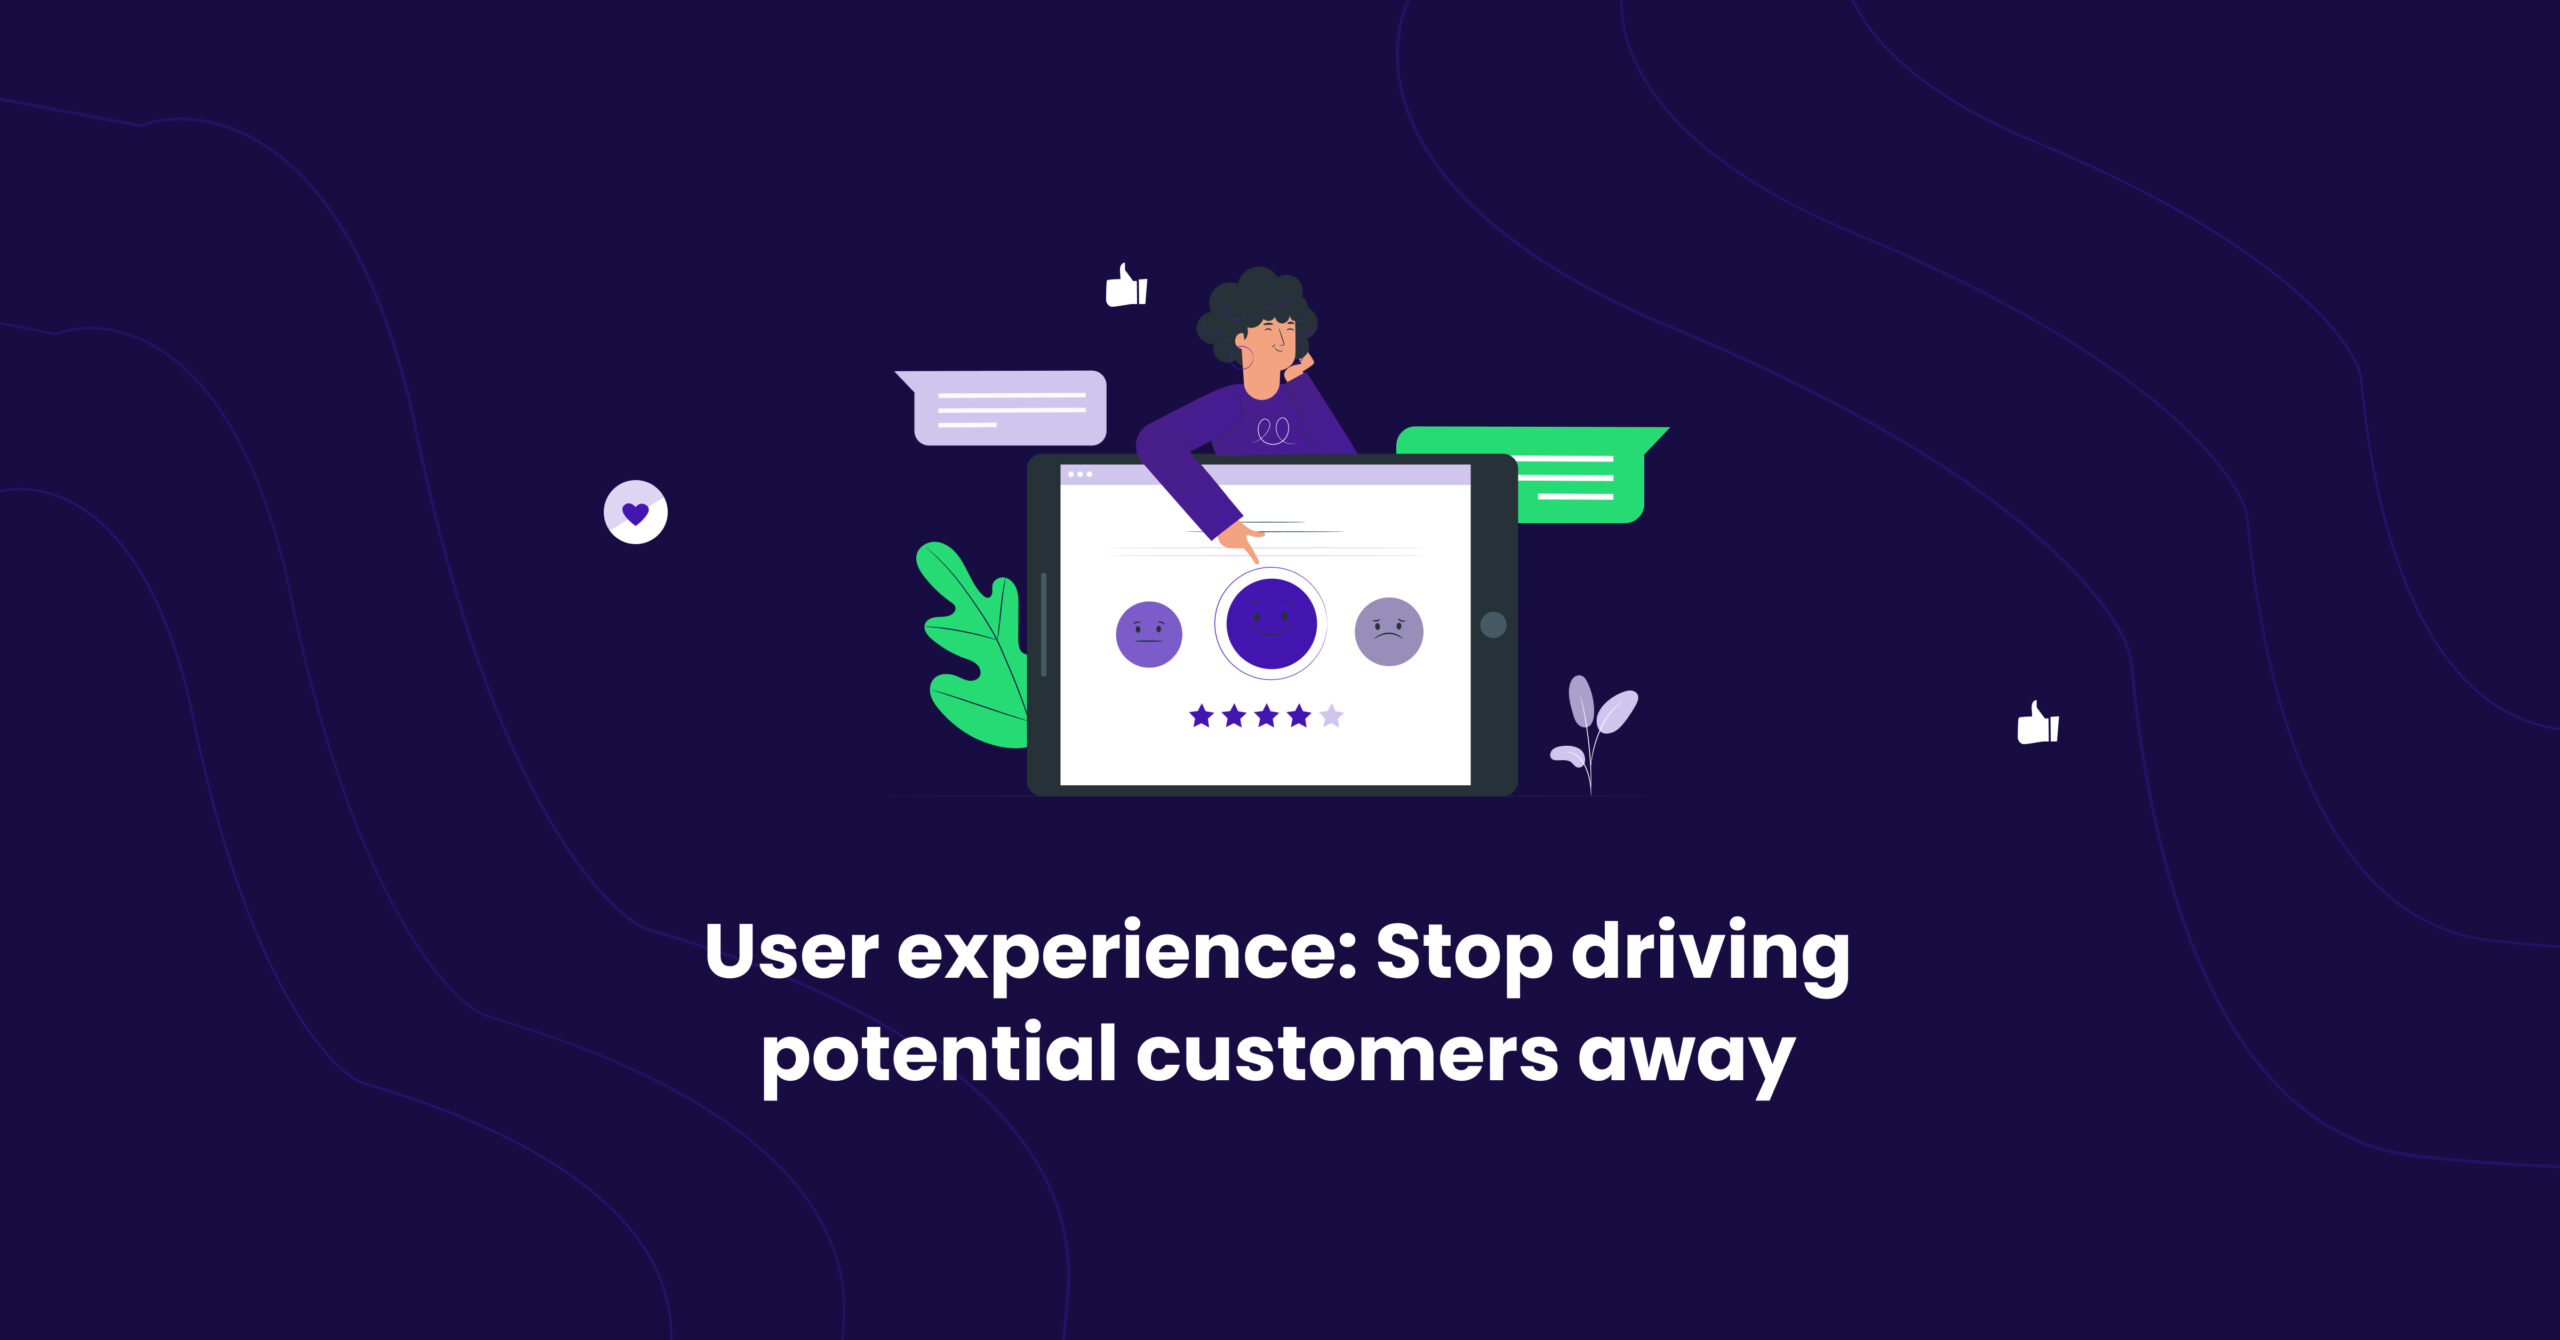 STOP DRIVING POTENTIAL CUSTOMERS AWAY